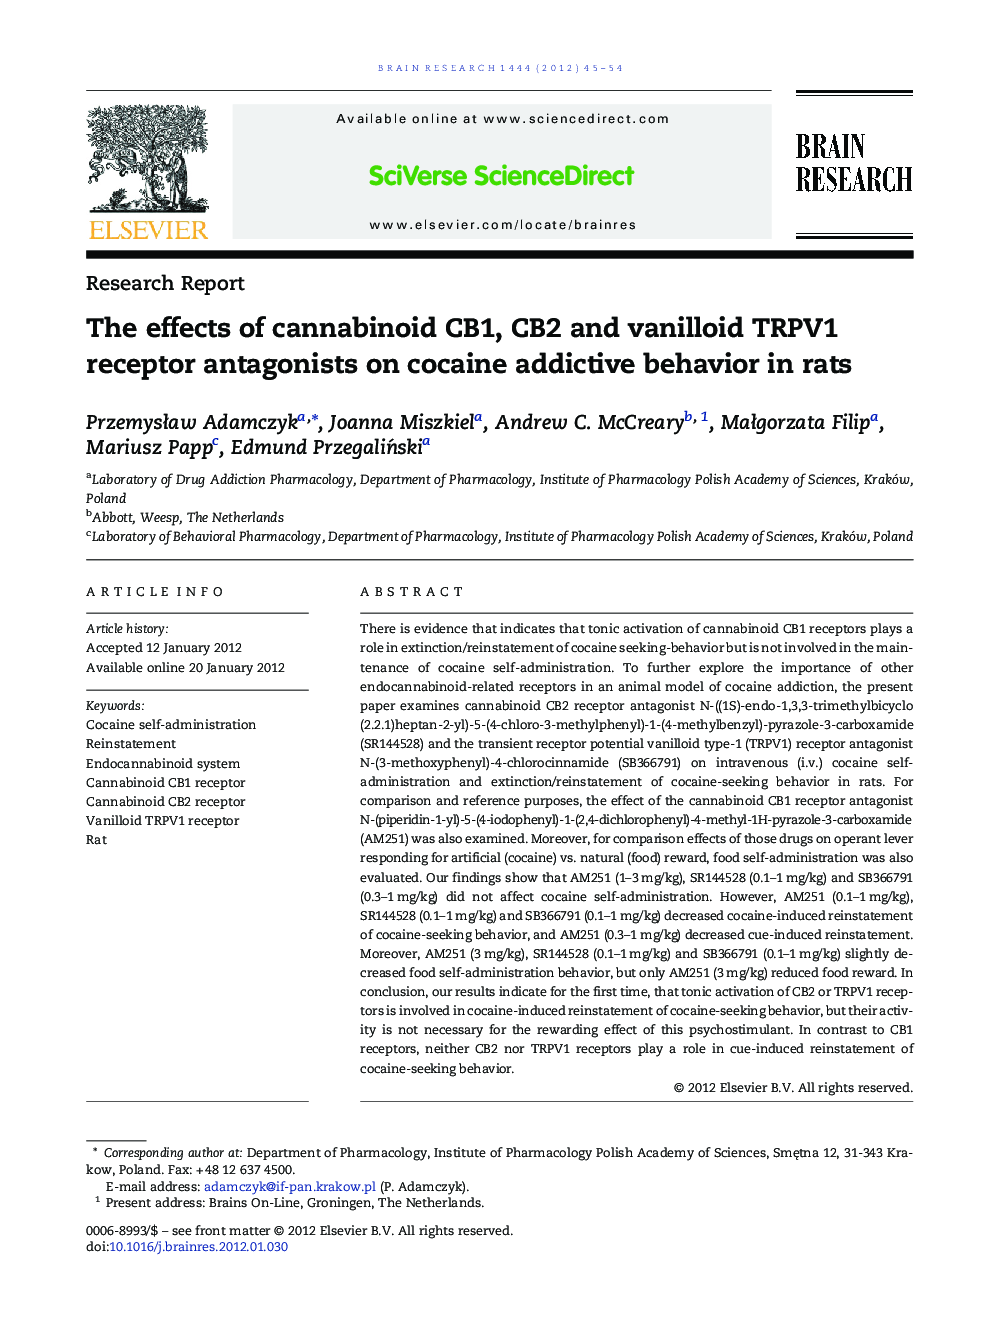 The effects of cannabinoid CB1, CB2 and vanilloid TRPV1 receptor antagonists on cocaine addictive behavior in rats